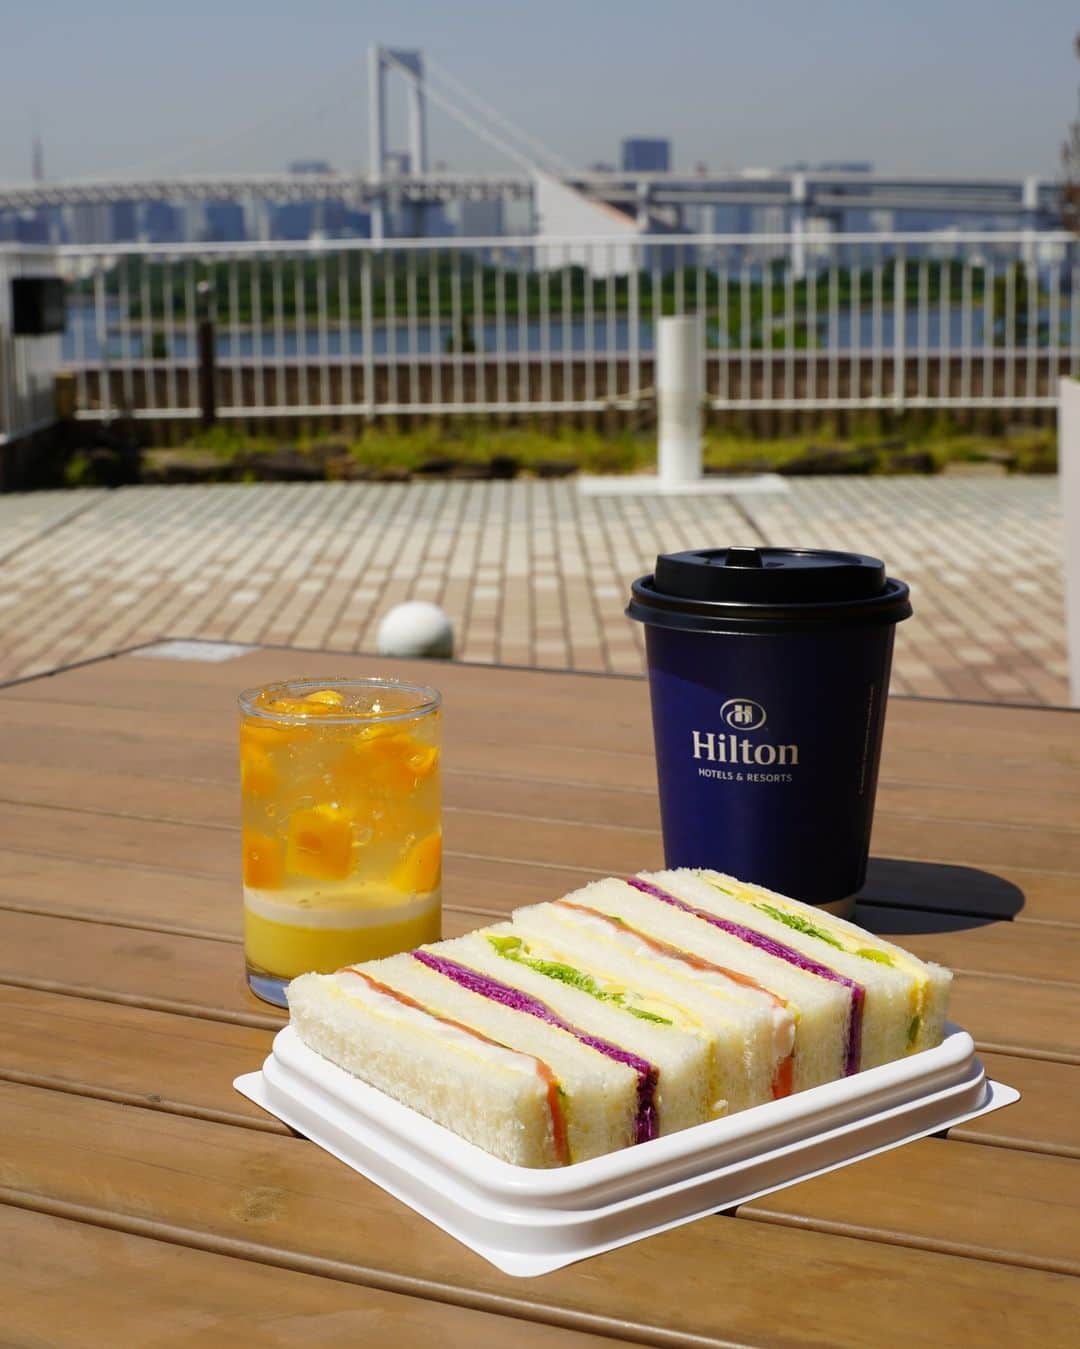 Hilton Tokyo Odaiba ヒルトン東京お台場のインスタグラム：「いよいよ夏休みのシーズン到来⛱️☀️ お子様たちと思いっきり遊んだあとは、「シースケープ　スイーツ&コーヒー」のテイクアウトはいかがでしょうか？  初夏の心地良い風を感じながら、美味しいスイーツとドリンクでほっと一息ついてください🍰🥤  Finally, the season of summer vacation has arrived! After having a fantastic time playing with your children, why not indulge in the delightful takeout treats from "Seascape Sweets & Coffee"?  Immerse yourself in the pleasant breeze of early summer and take a moment to relax with our delectable pastries and refreshing beverages🍰🥤  #ヒルトン東京お台場 #hiltontokyoodaiba」